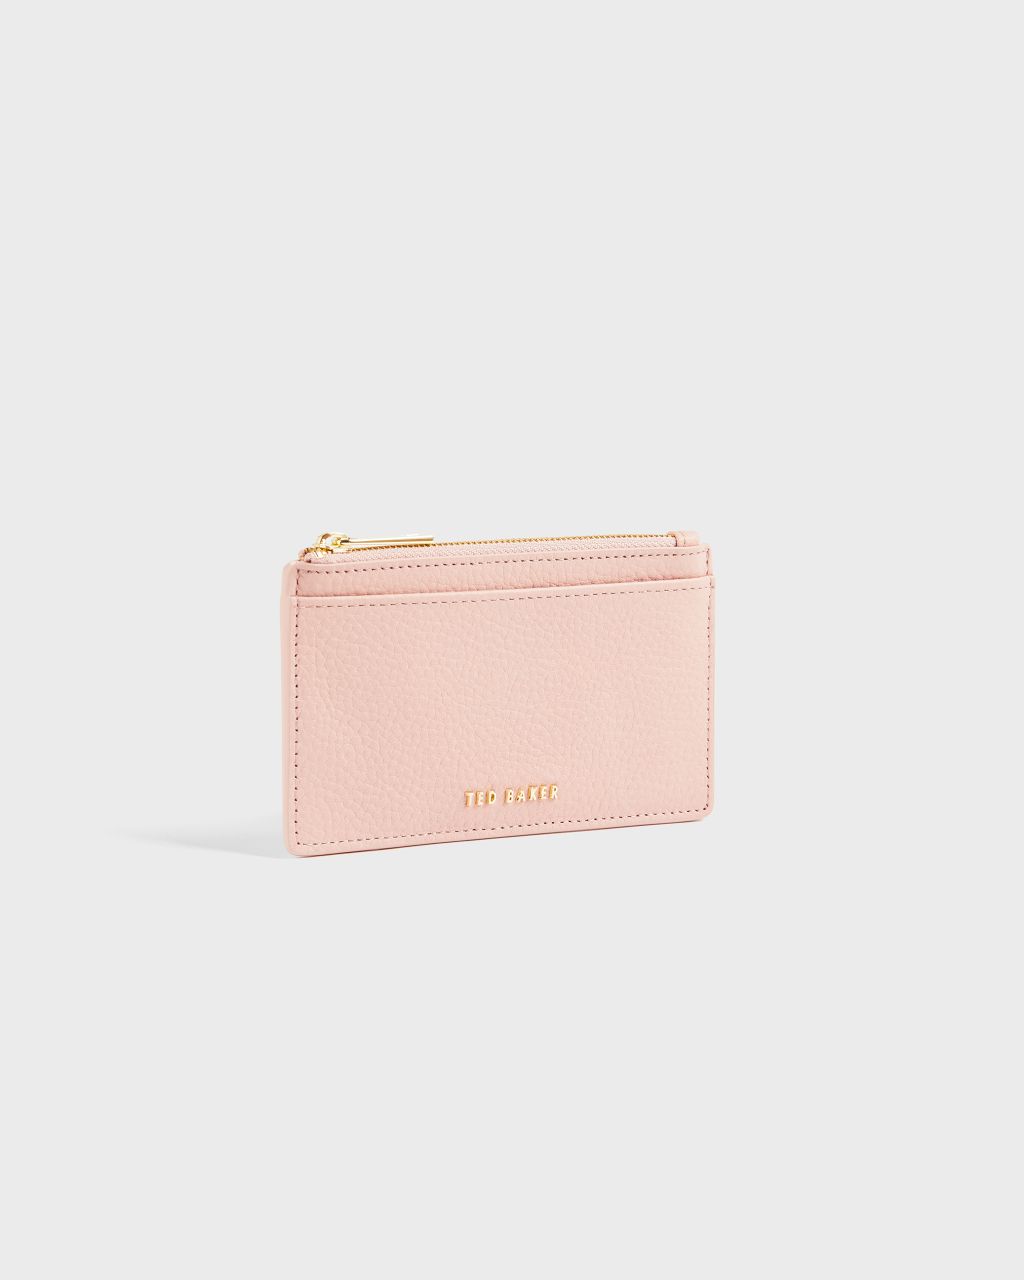 Ted Baker Women's Zip Card Holder in Pale Pink, Briell, Leather